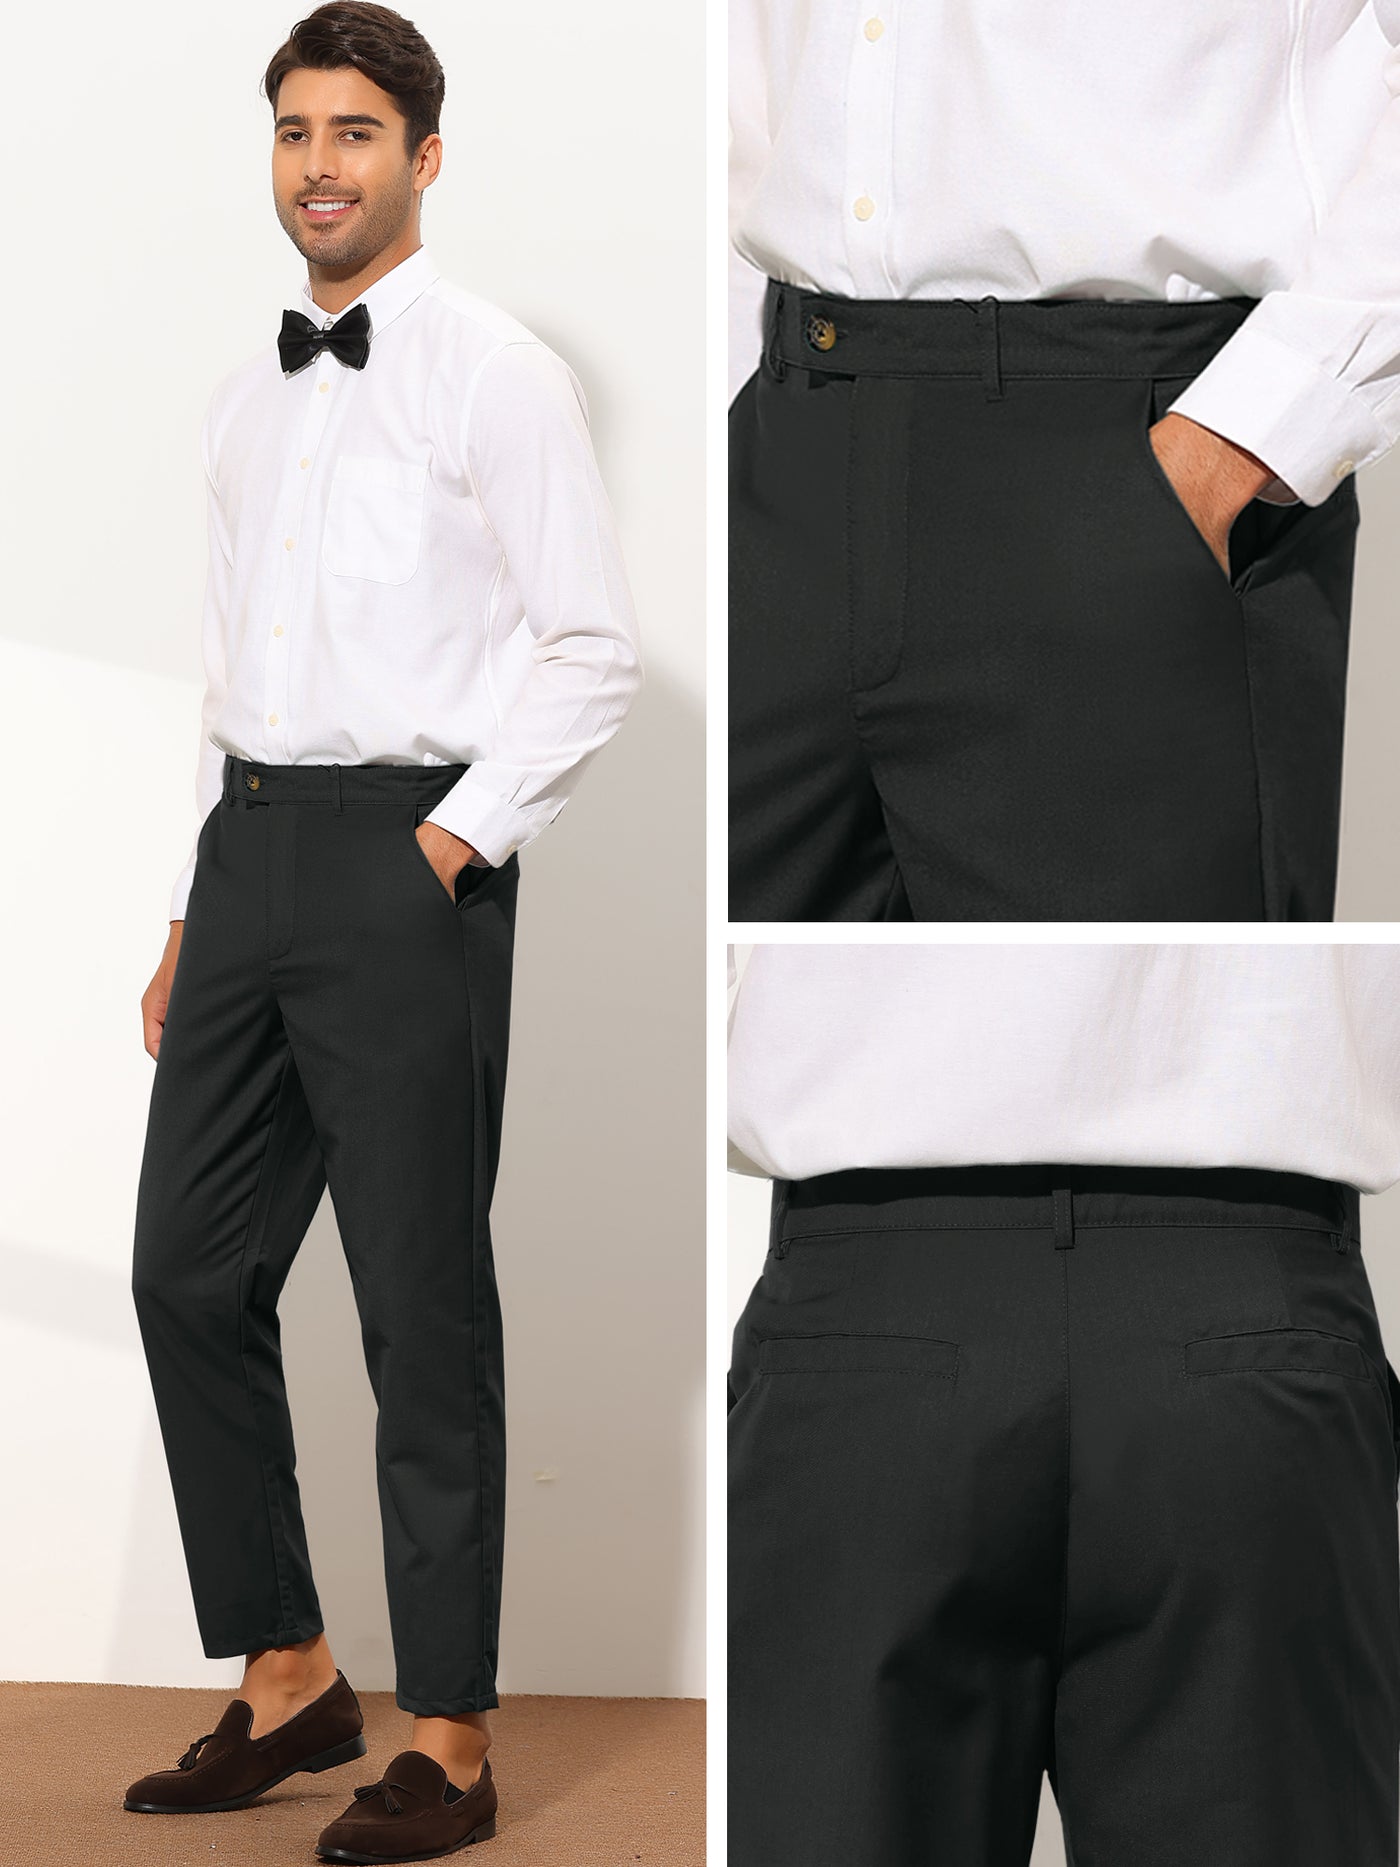 Bublédon Men's Cropped Solid Flat Front Business Prom Tapered Dress Pants